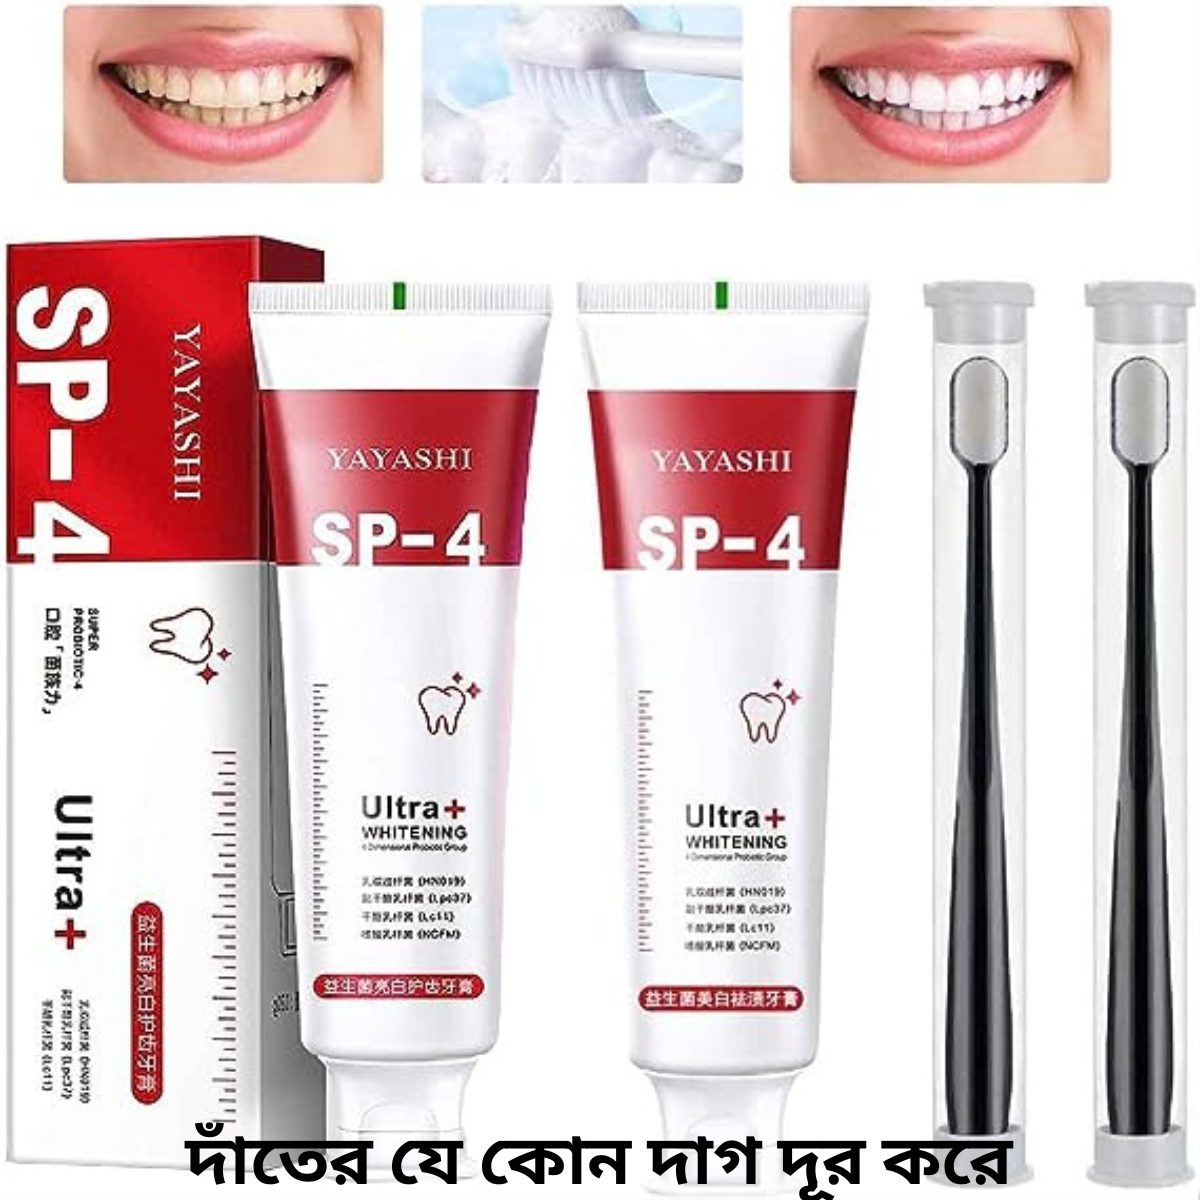 100g  Whitening & Stain Removal Toothpaste Brighten Teeth Fresh Breath Improve Yellow Teeth Family Pack